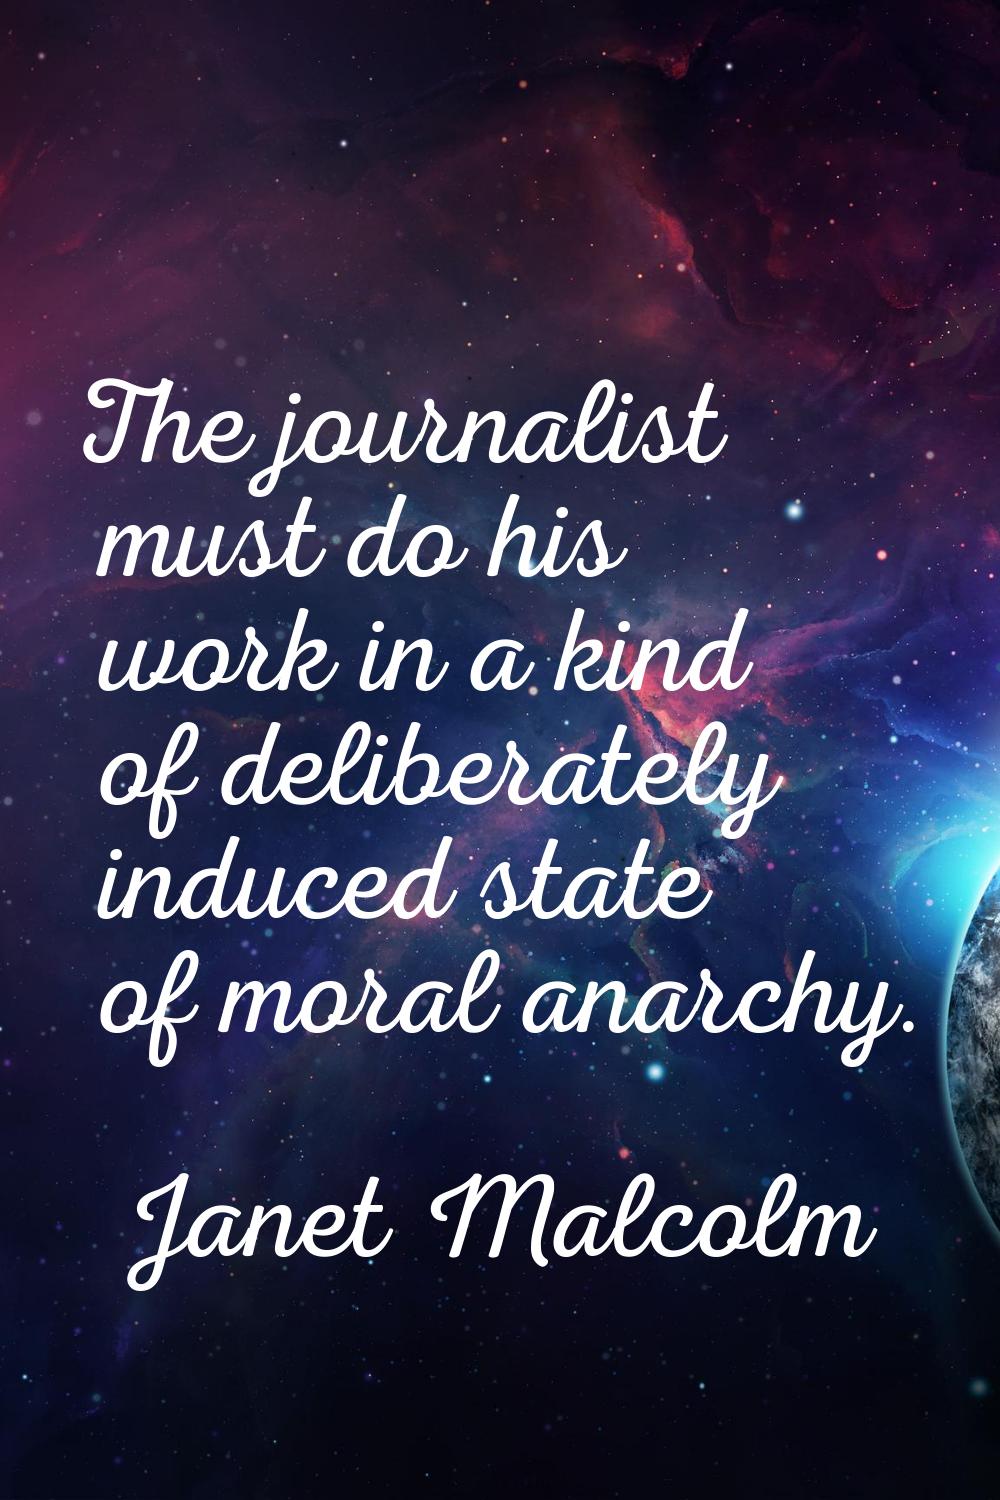 The journalist must do his work in a kind of deliberately induced state of moral anarchy.